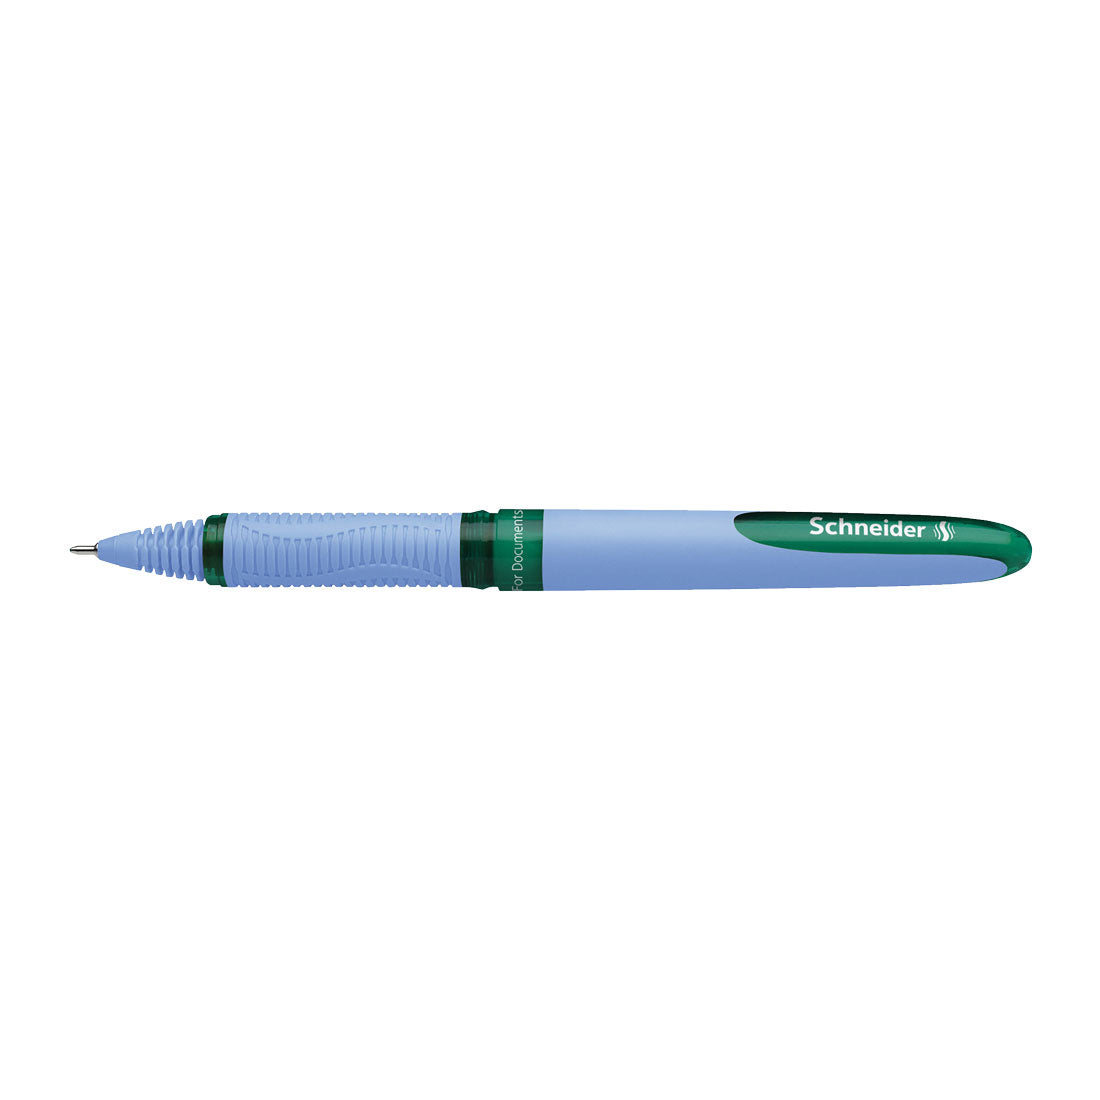 One Hybrid N Rollerball 0.5mm, Box of 10#ink-color_green